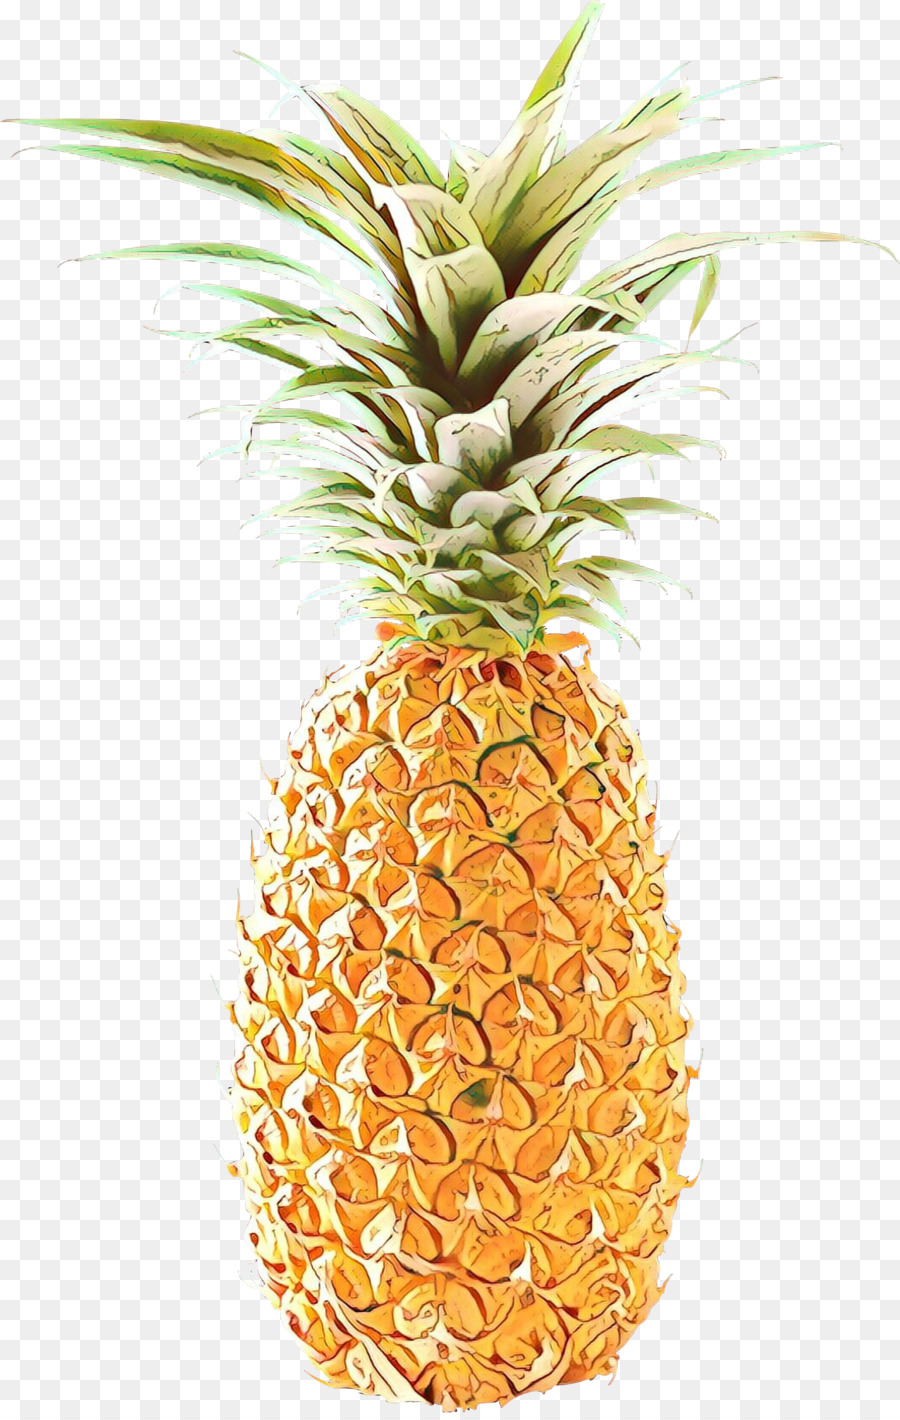 Pineapple -  png download - 1555*2441 - Free Transparent Pineapple png Download.